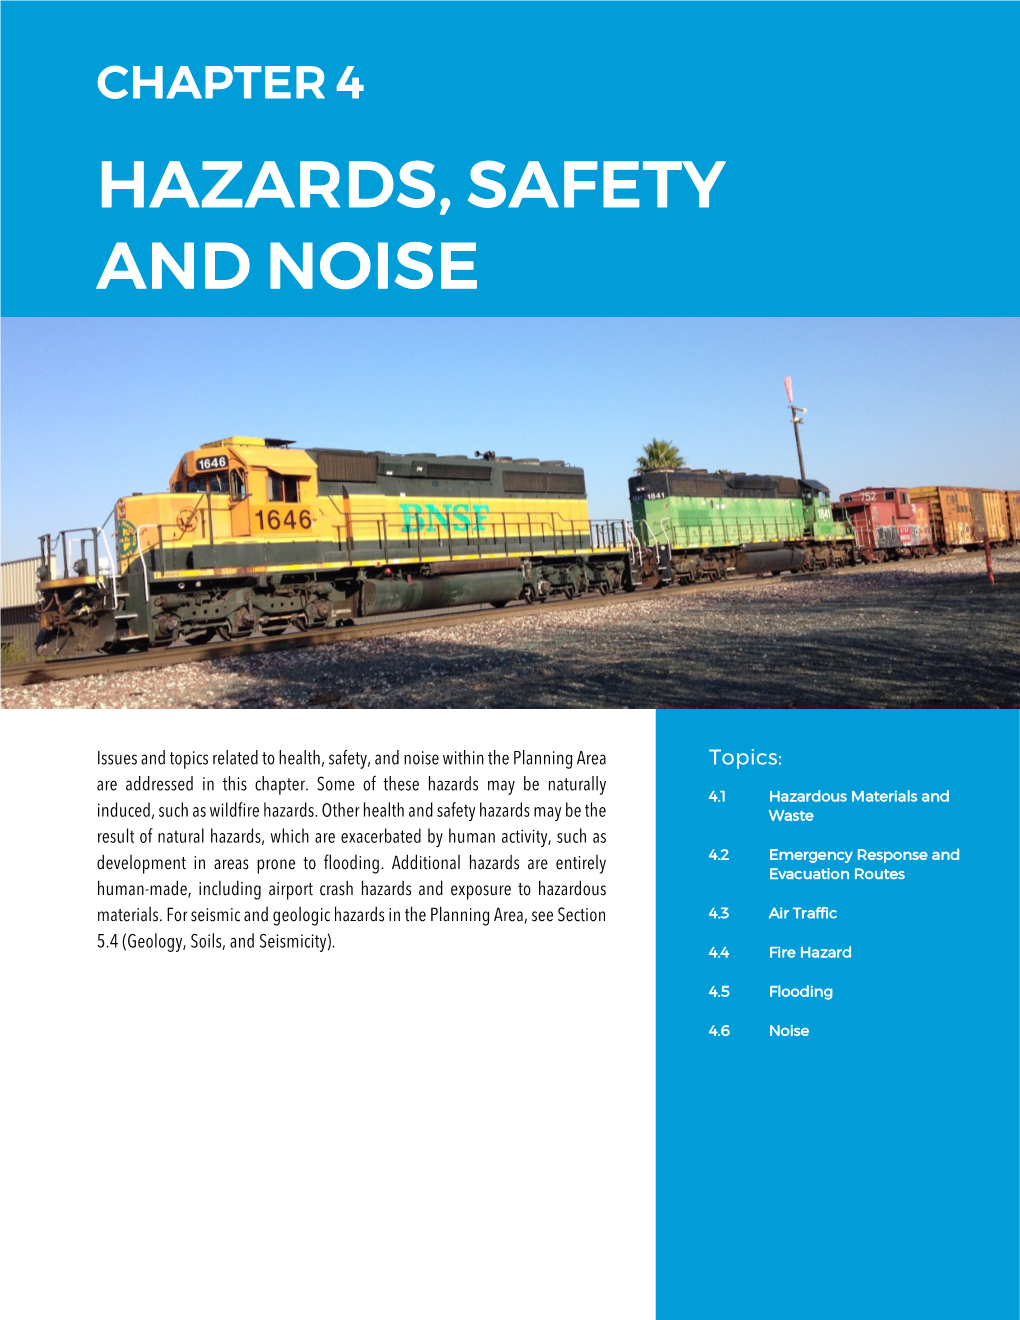 Hazards, Safety and Noise